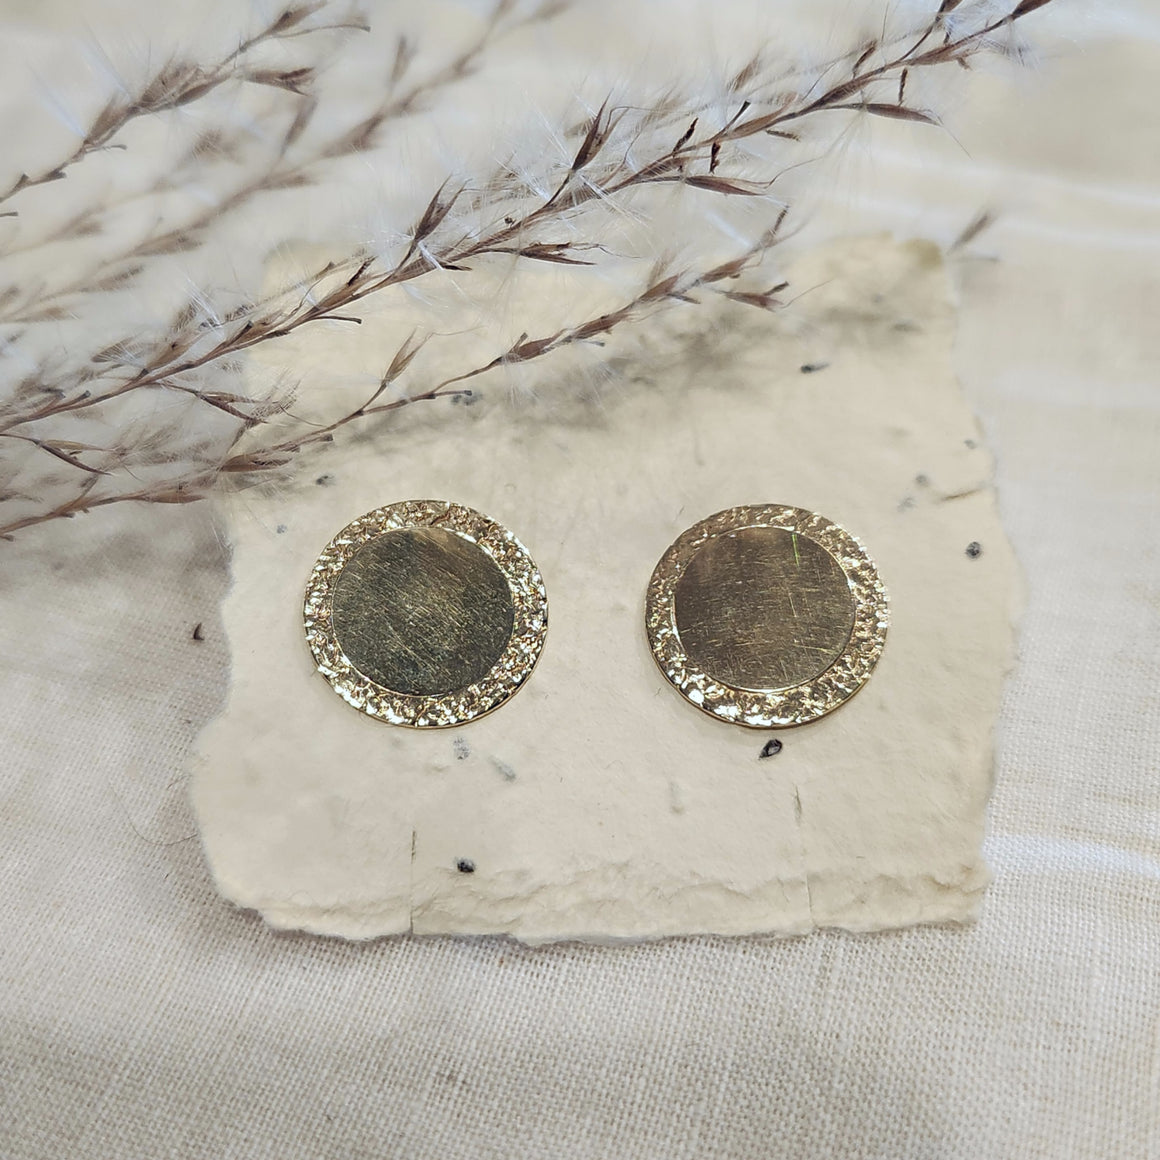 14k yellow gold disc stud earrings with textured border